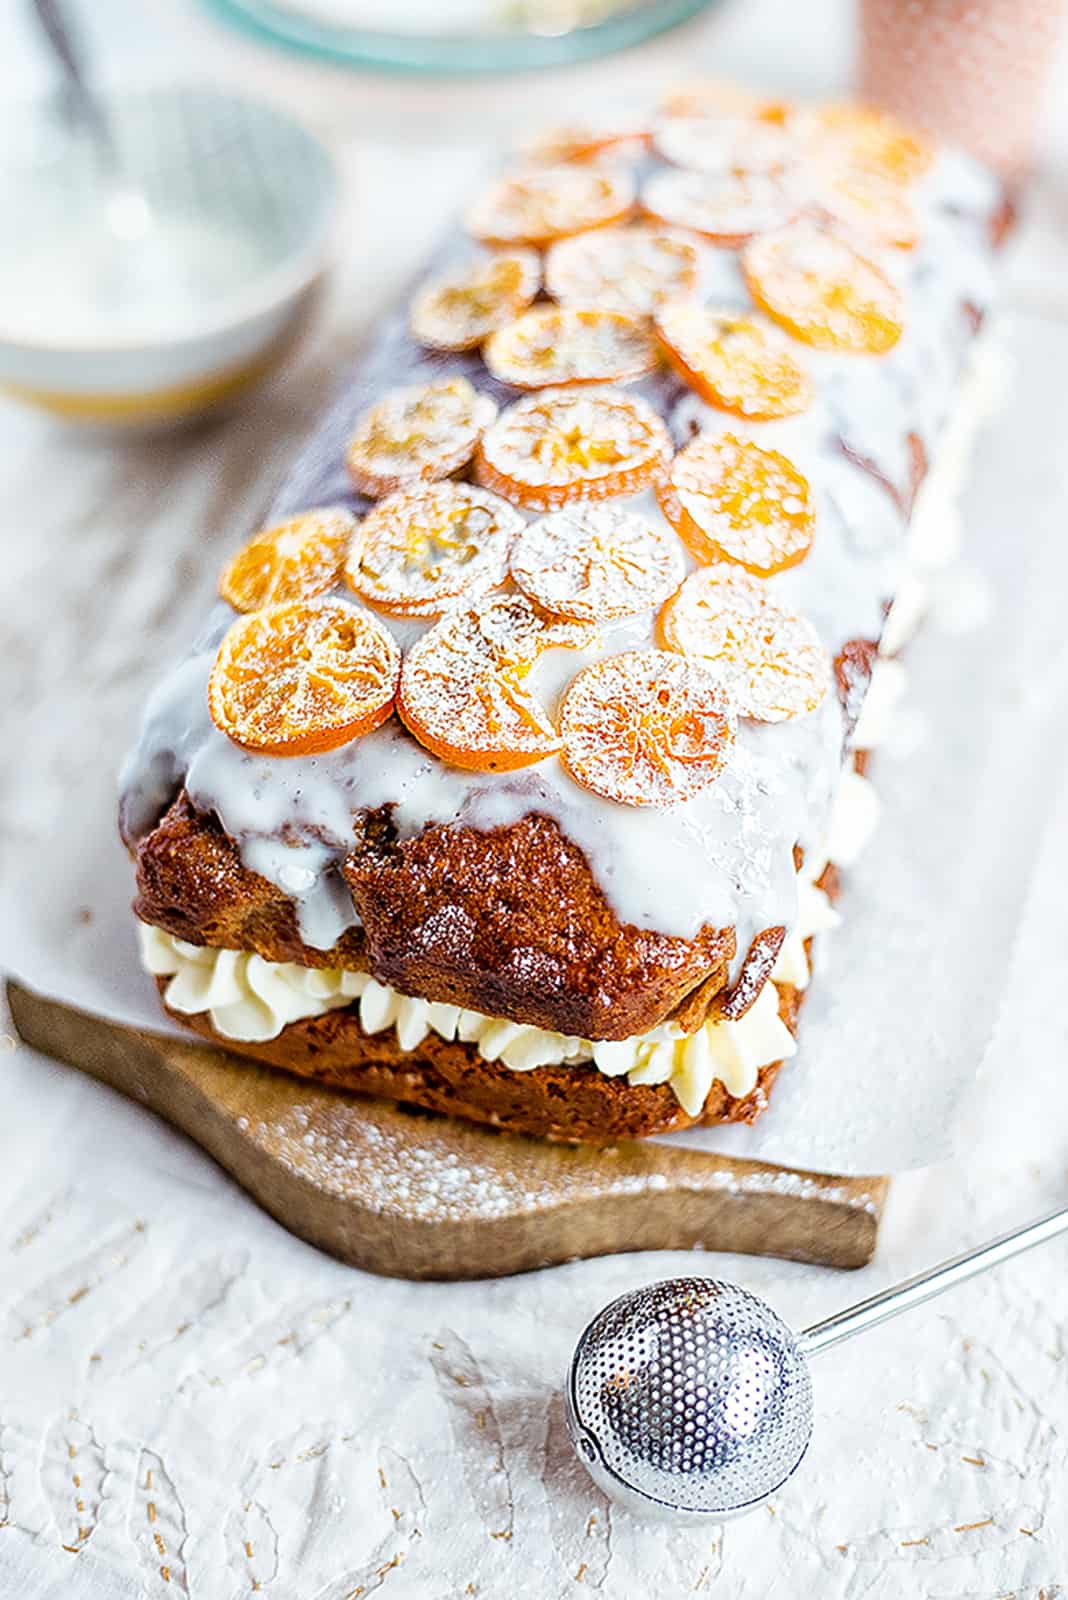 Orange olive oil cake filled with cream and decorated with orange slices